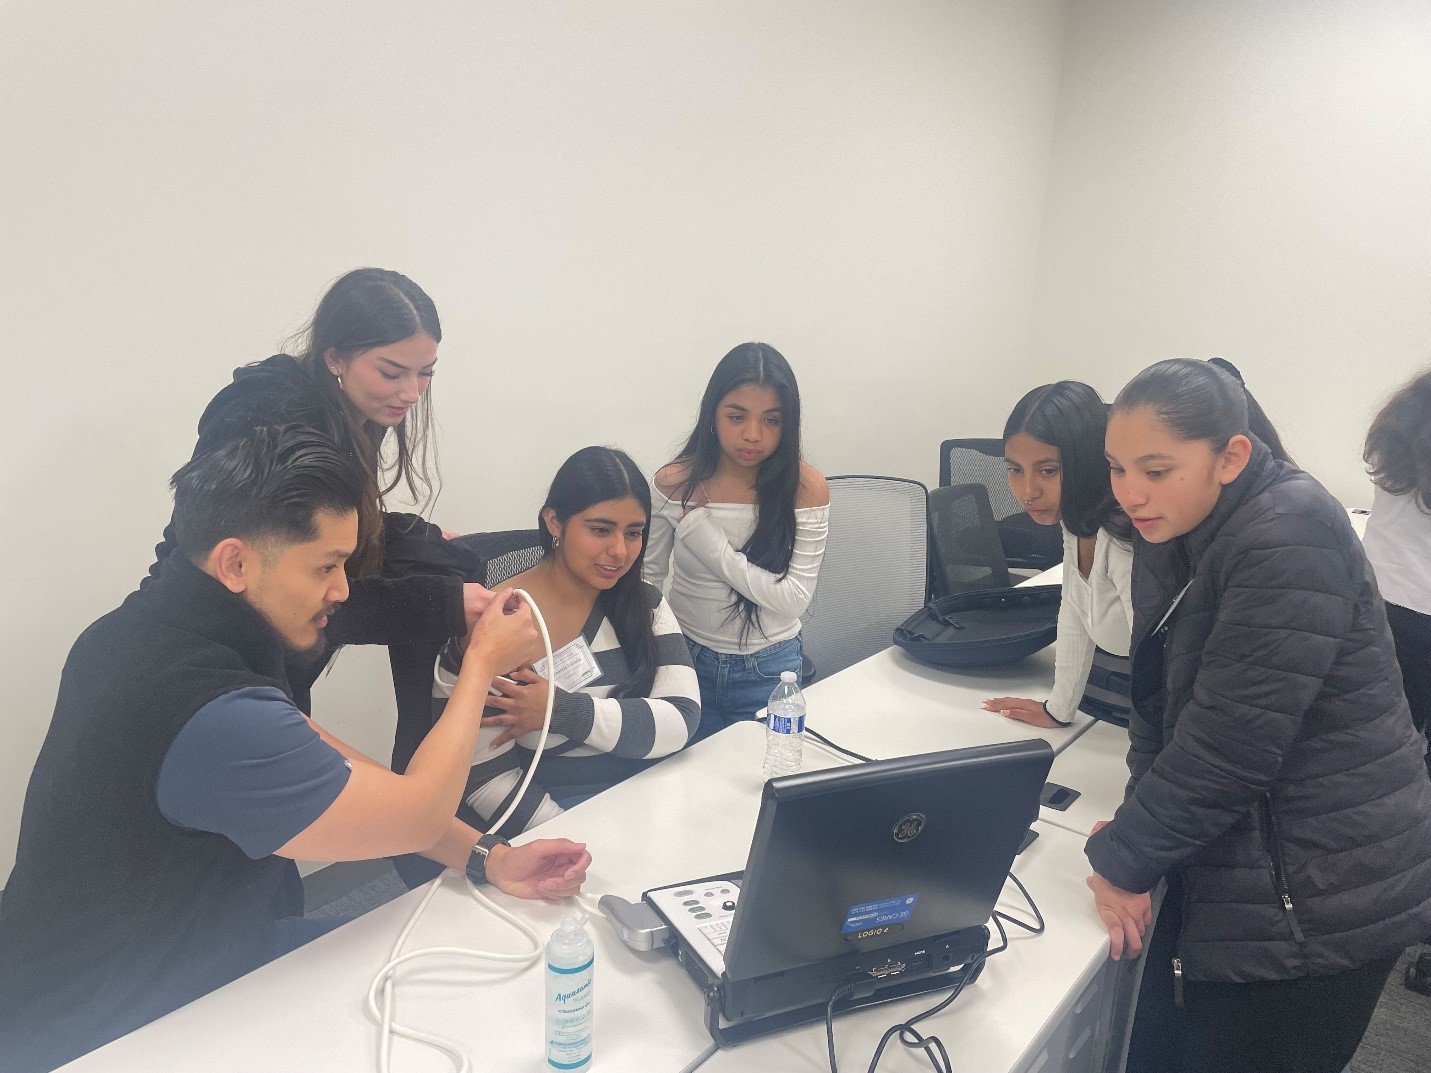 AltaMed Escalera students learning new technology